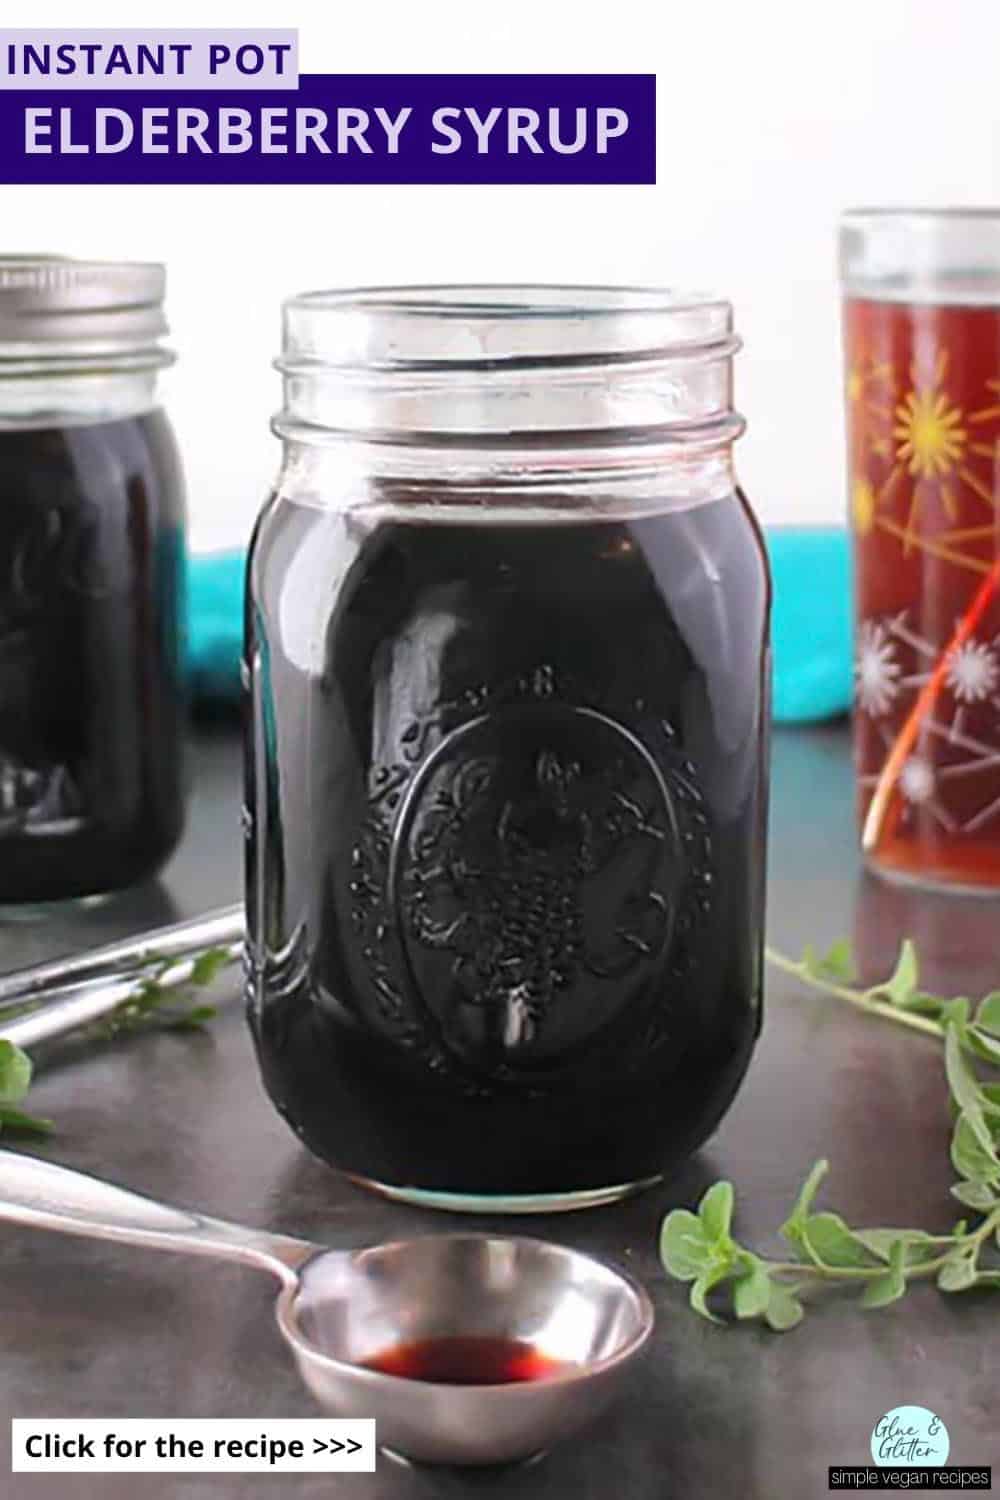 jars of instant pot elderberry syrup with a drink made from the syrup in the background, text overlay